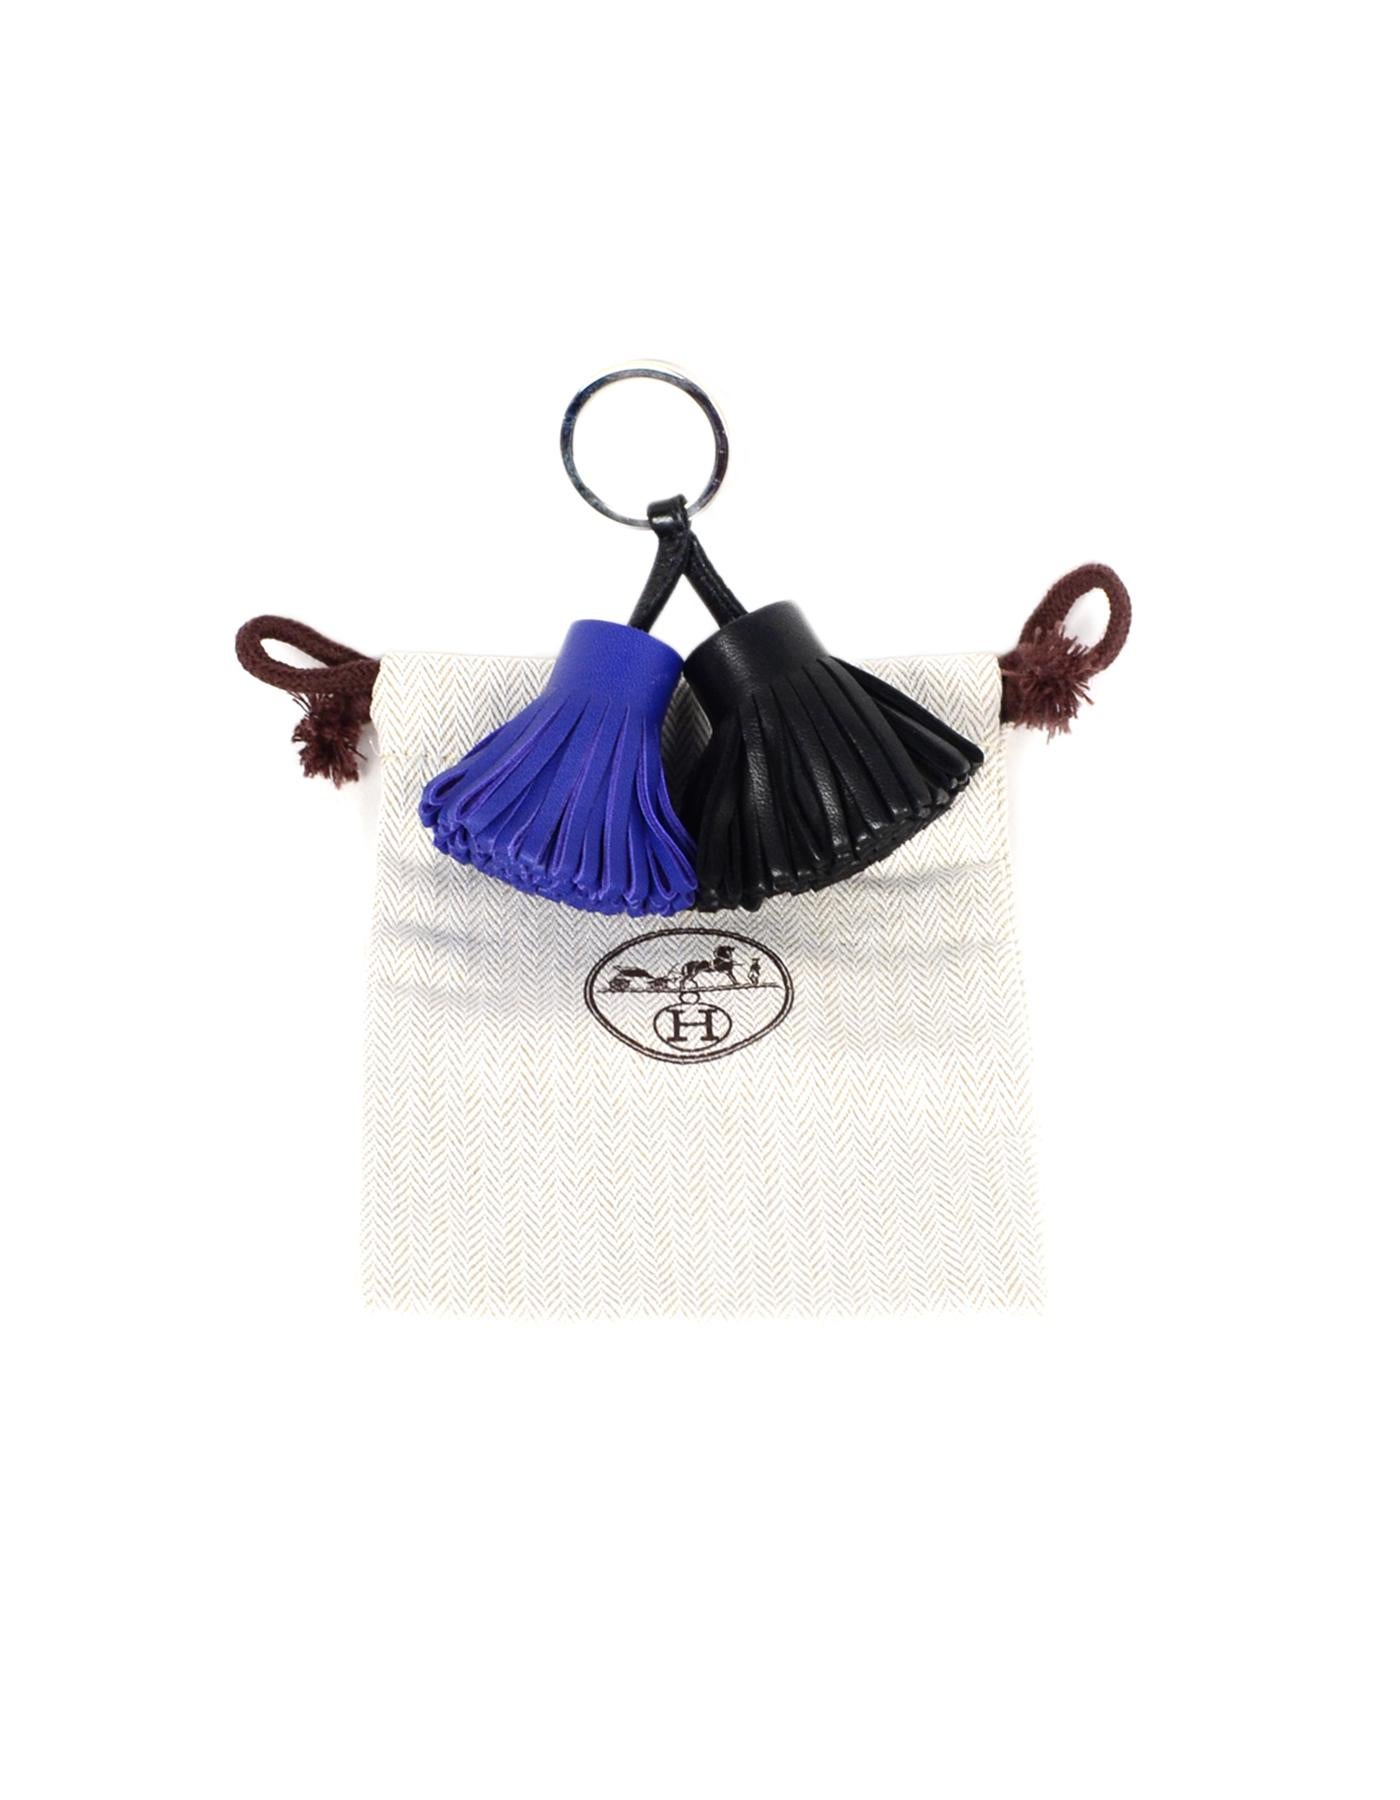 Hermes 2015 Black/Blue Electric Carmen Uno-Dos Key Ring W/ DB

Made In: France
Year of Production: 2015
Color: Black/blue
Hardware: Palladium 
Materials: Leather, metal
Closure/Opening: Key ring closure 
Overall Condition: Excellent pre-owned